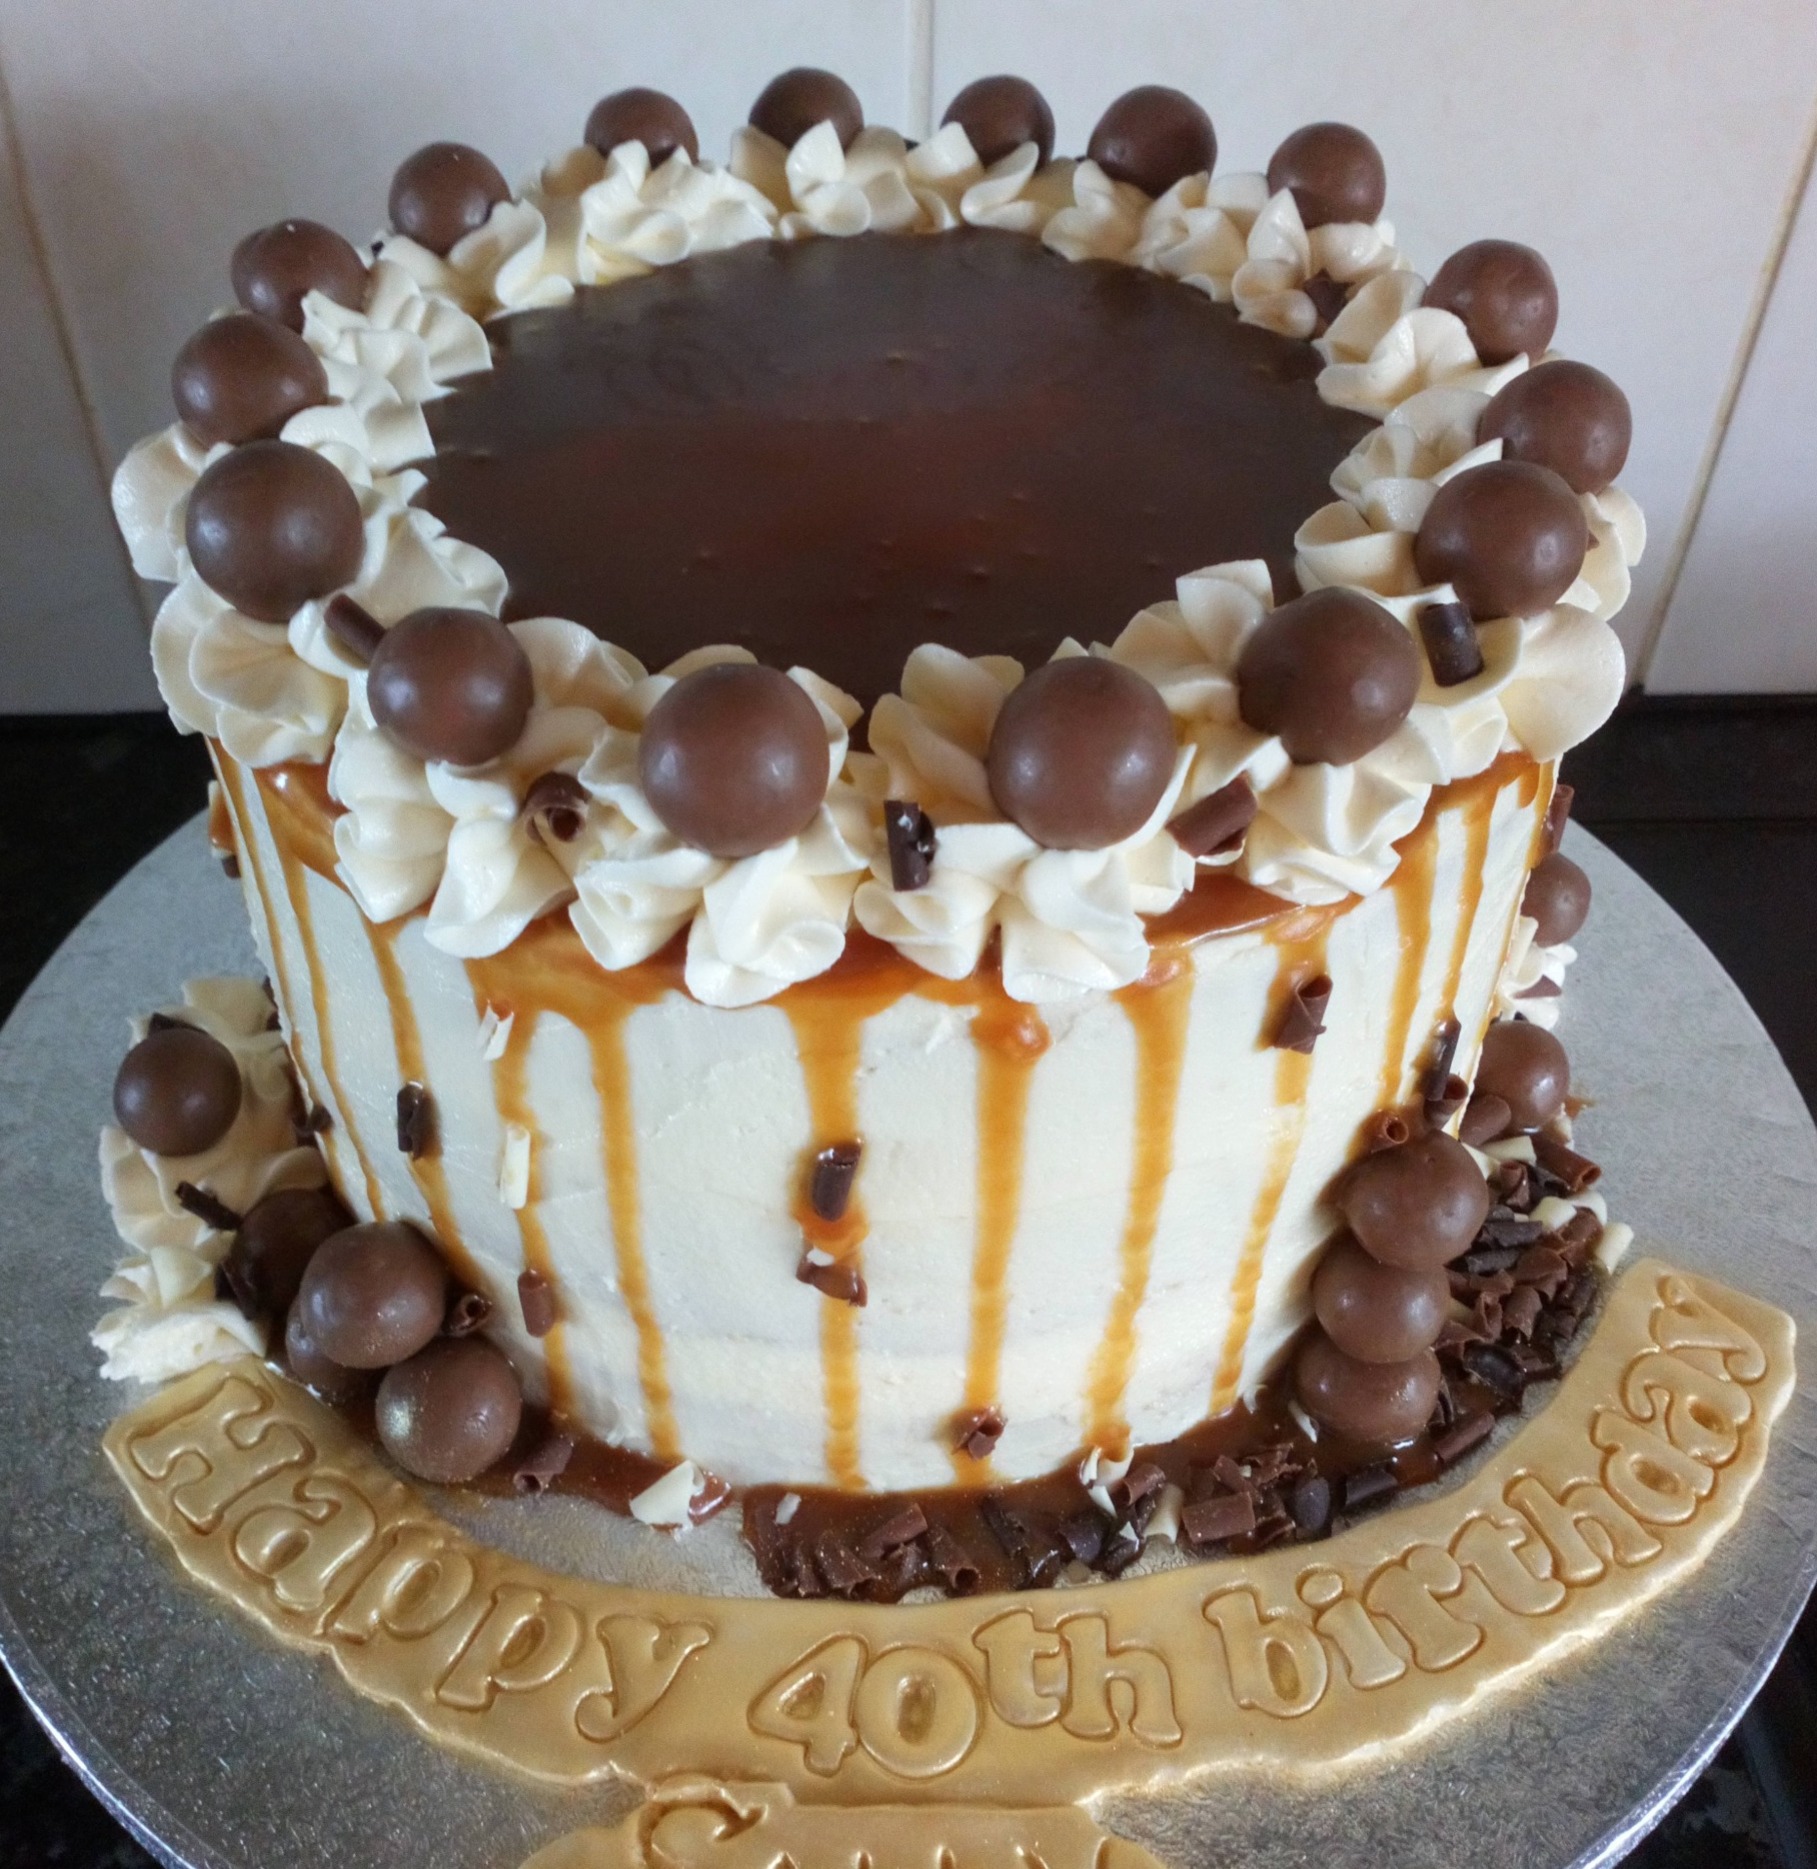 Salted caramel drip cake with maltesers